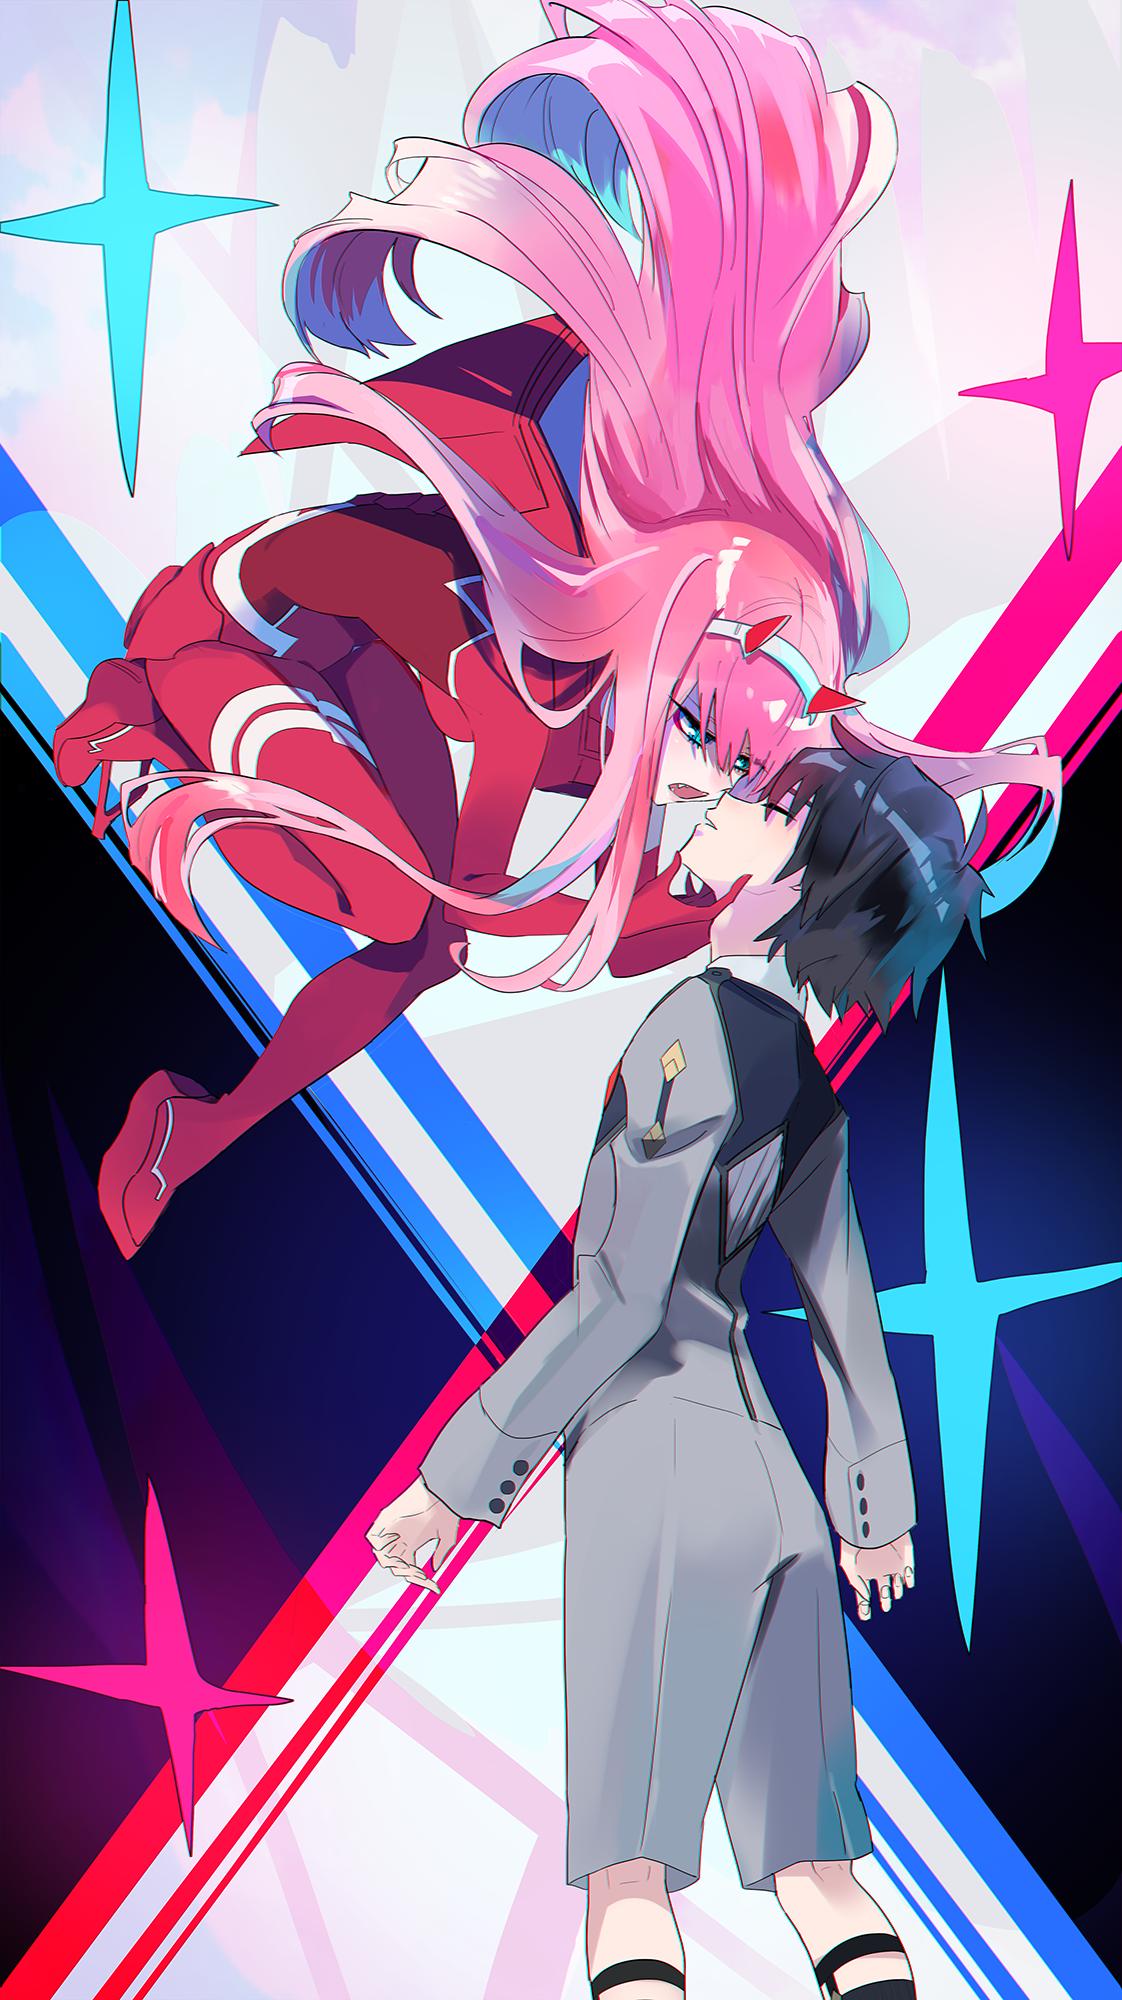 1122 x 2000 · png - DARLING in the FRANXX | Darling in the franxx, My darling, Anime